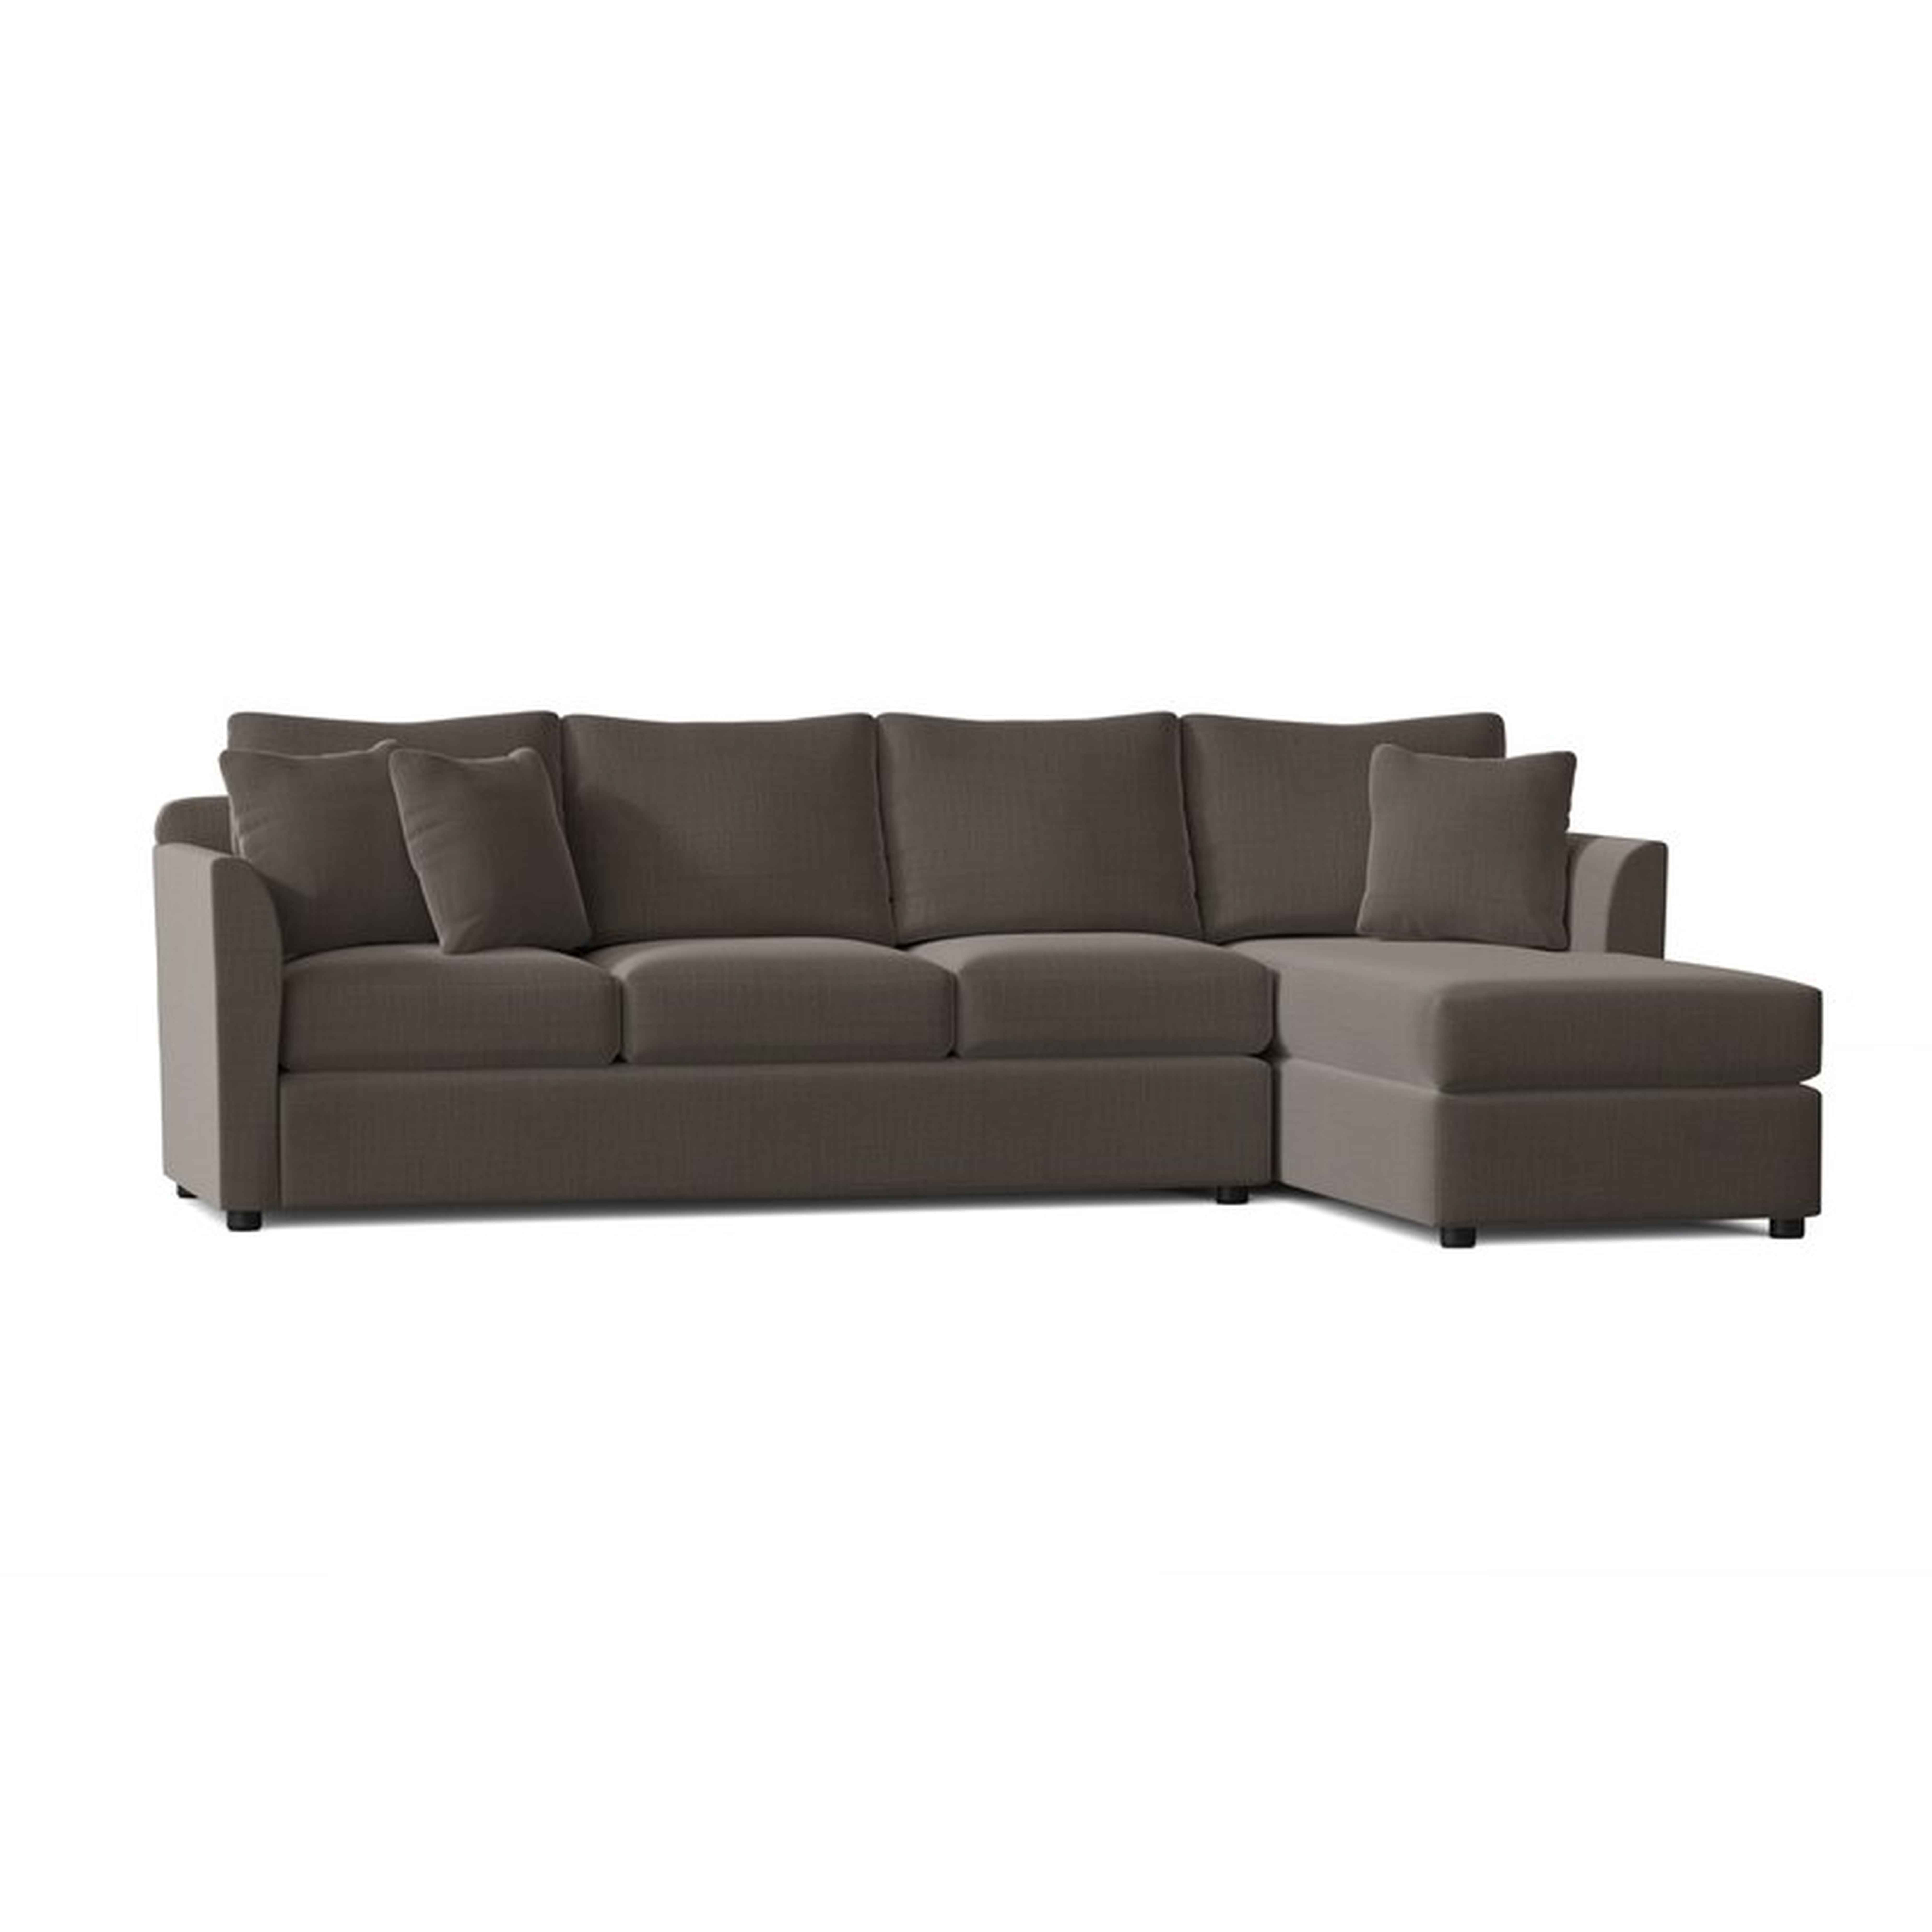 110" Sectional With Chaise - Birch Lane